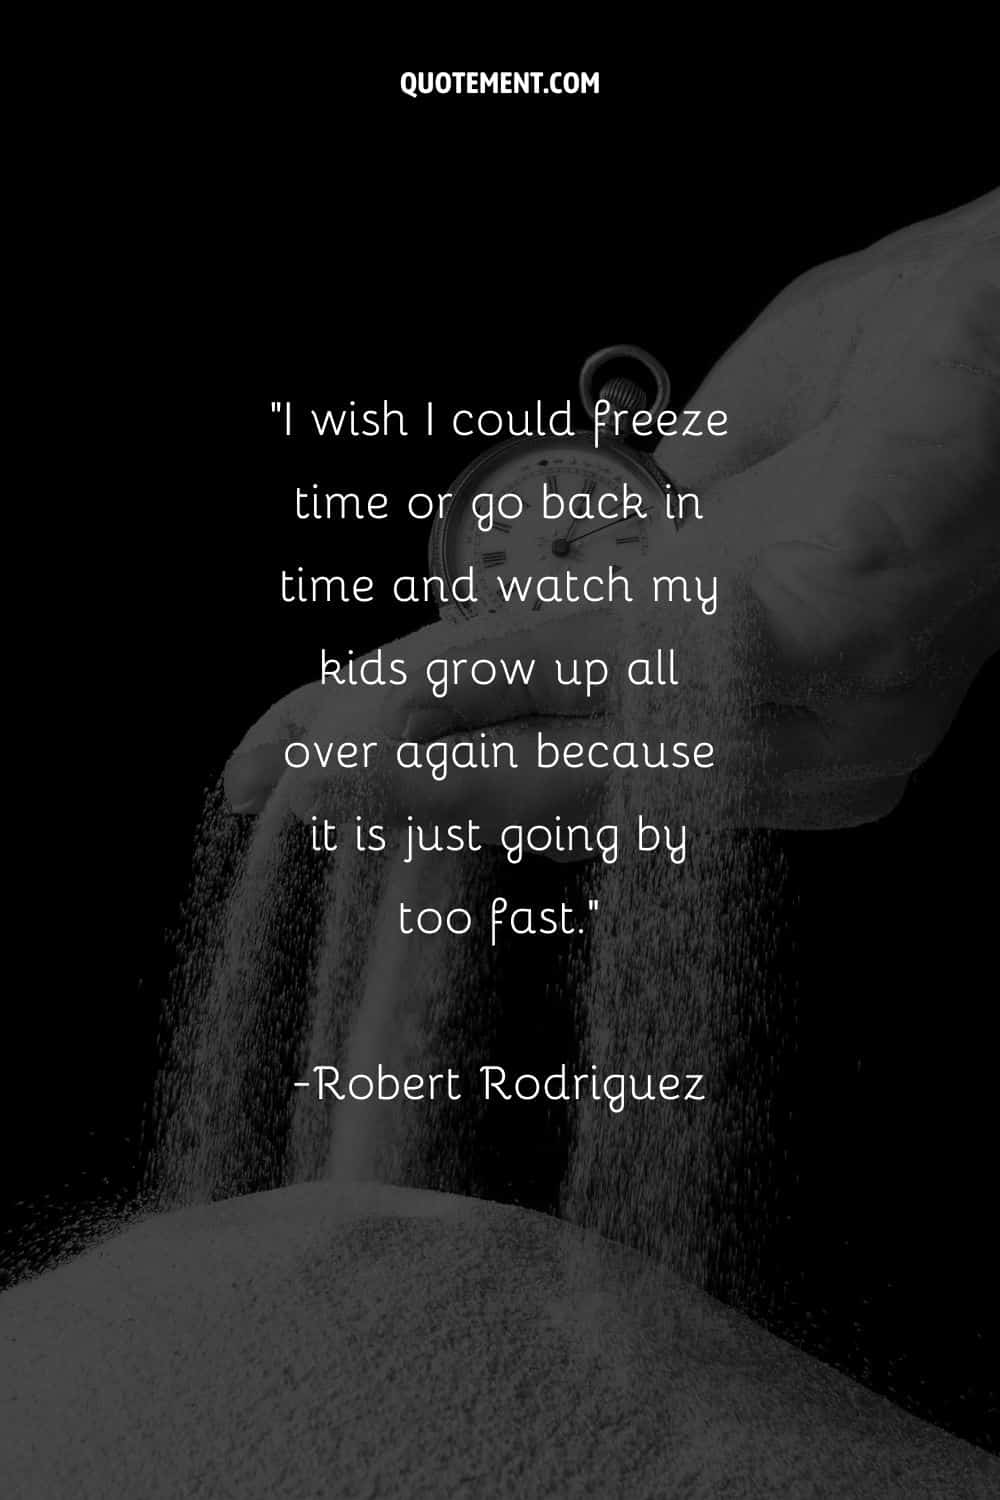 a pocket watch and sand in a human's hand representing nostalgic time goes by fast quote
